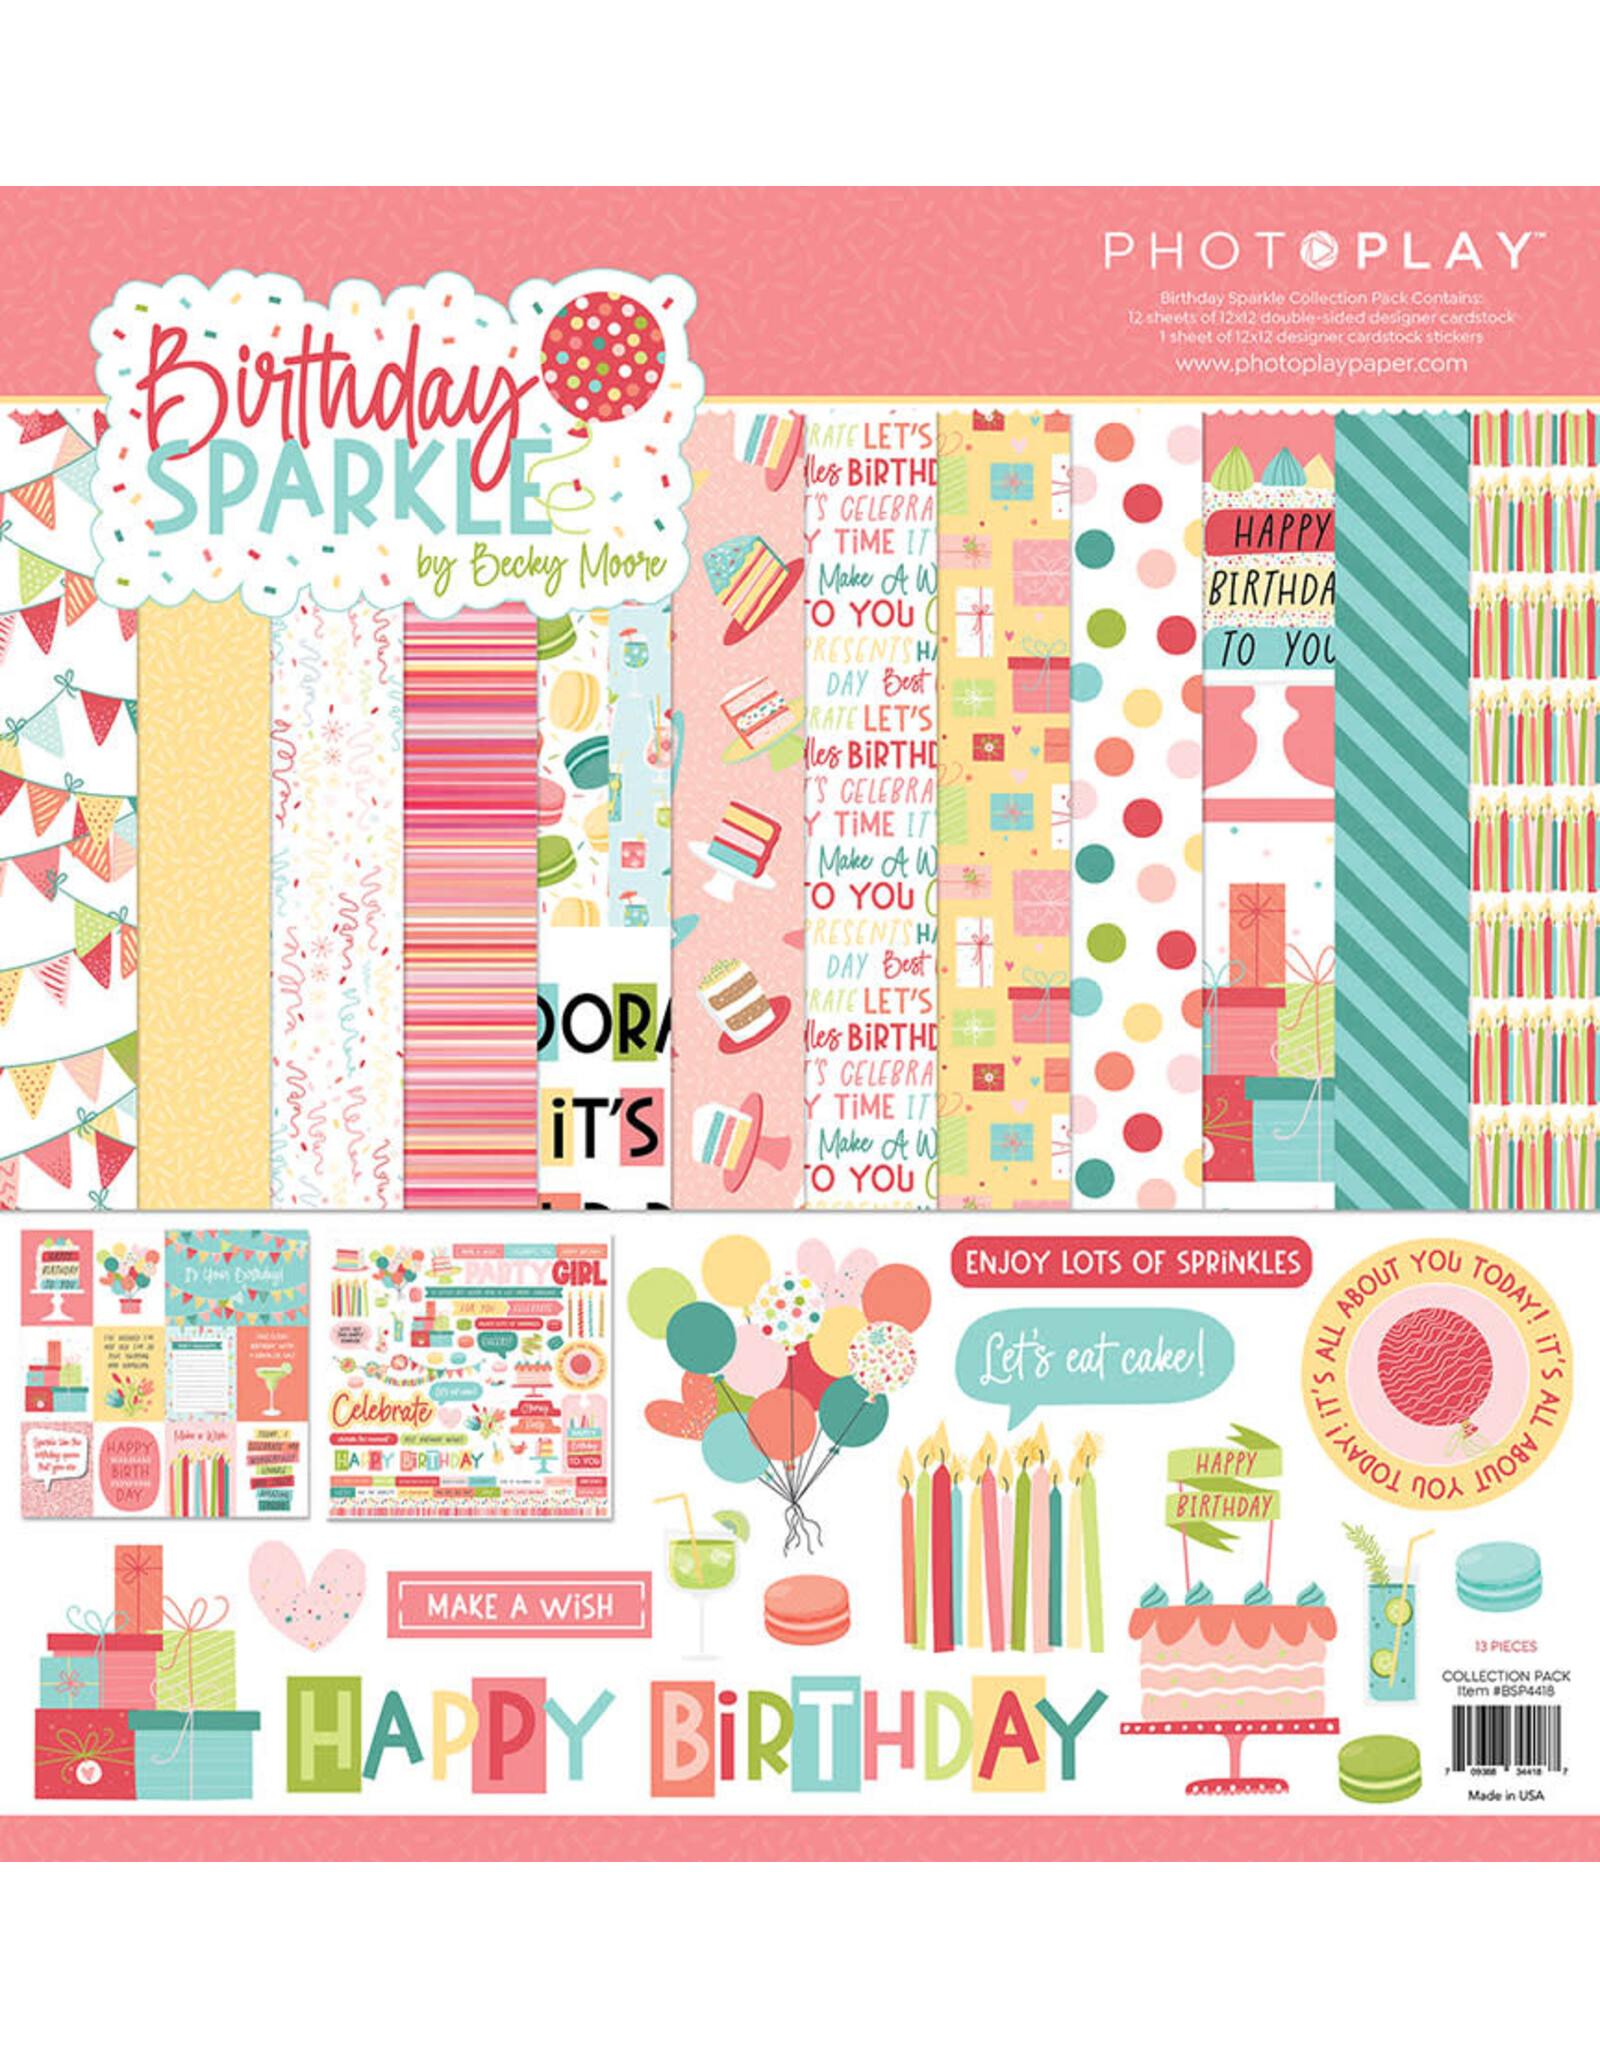 PHOTOPLAY Birthday Sparkle - Collection Pack